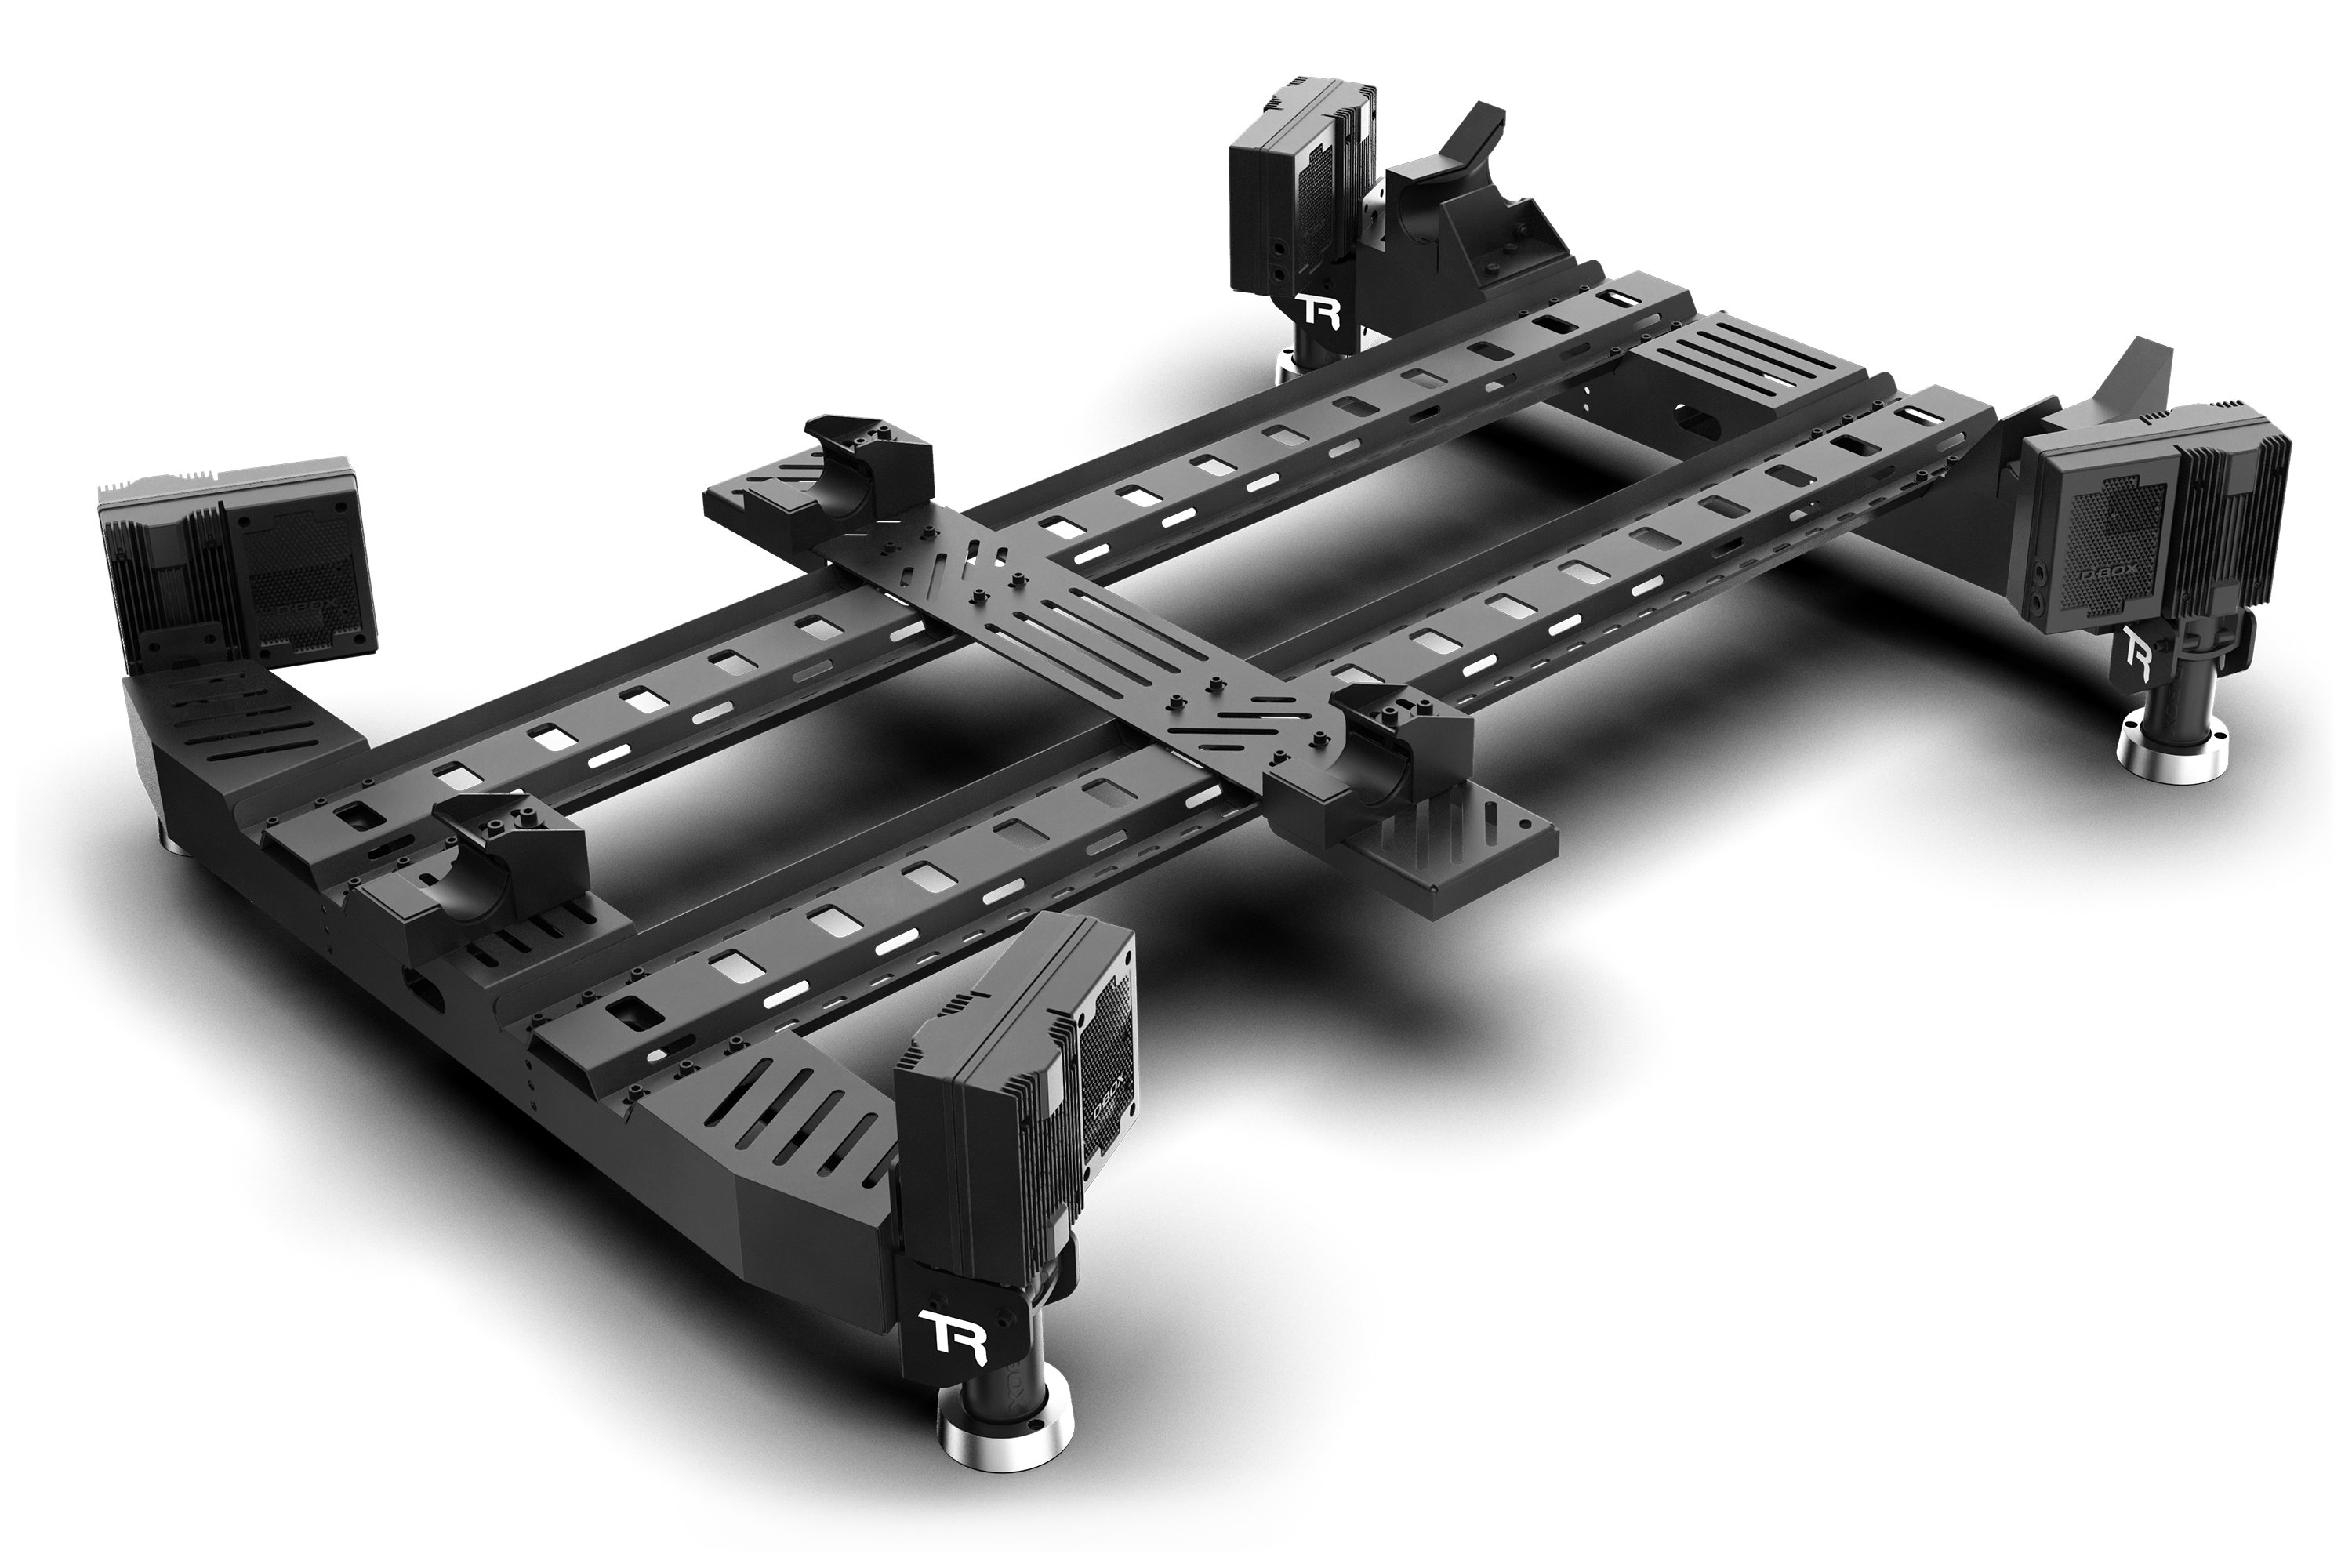 Motion System with 4 motors/actuators and Motion Sim Base